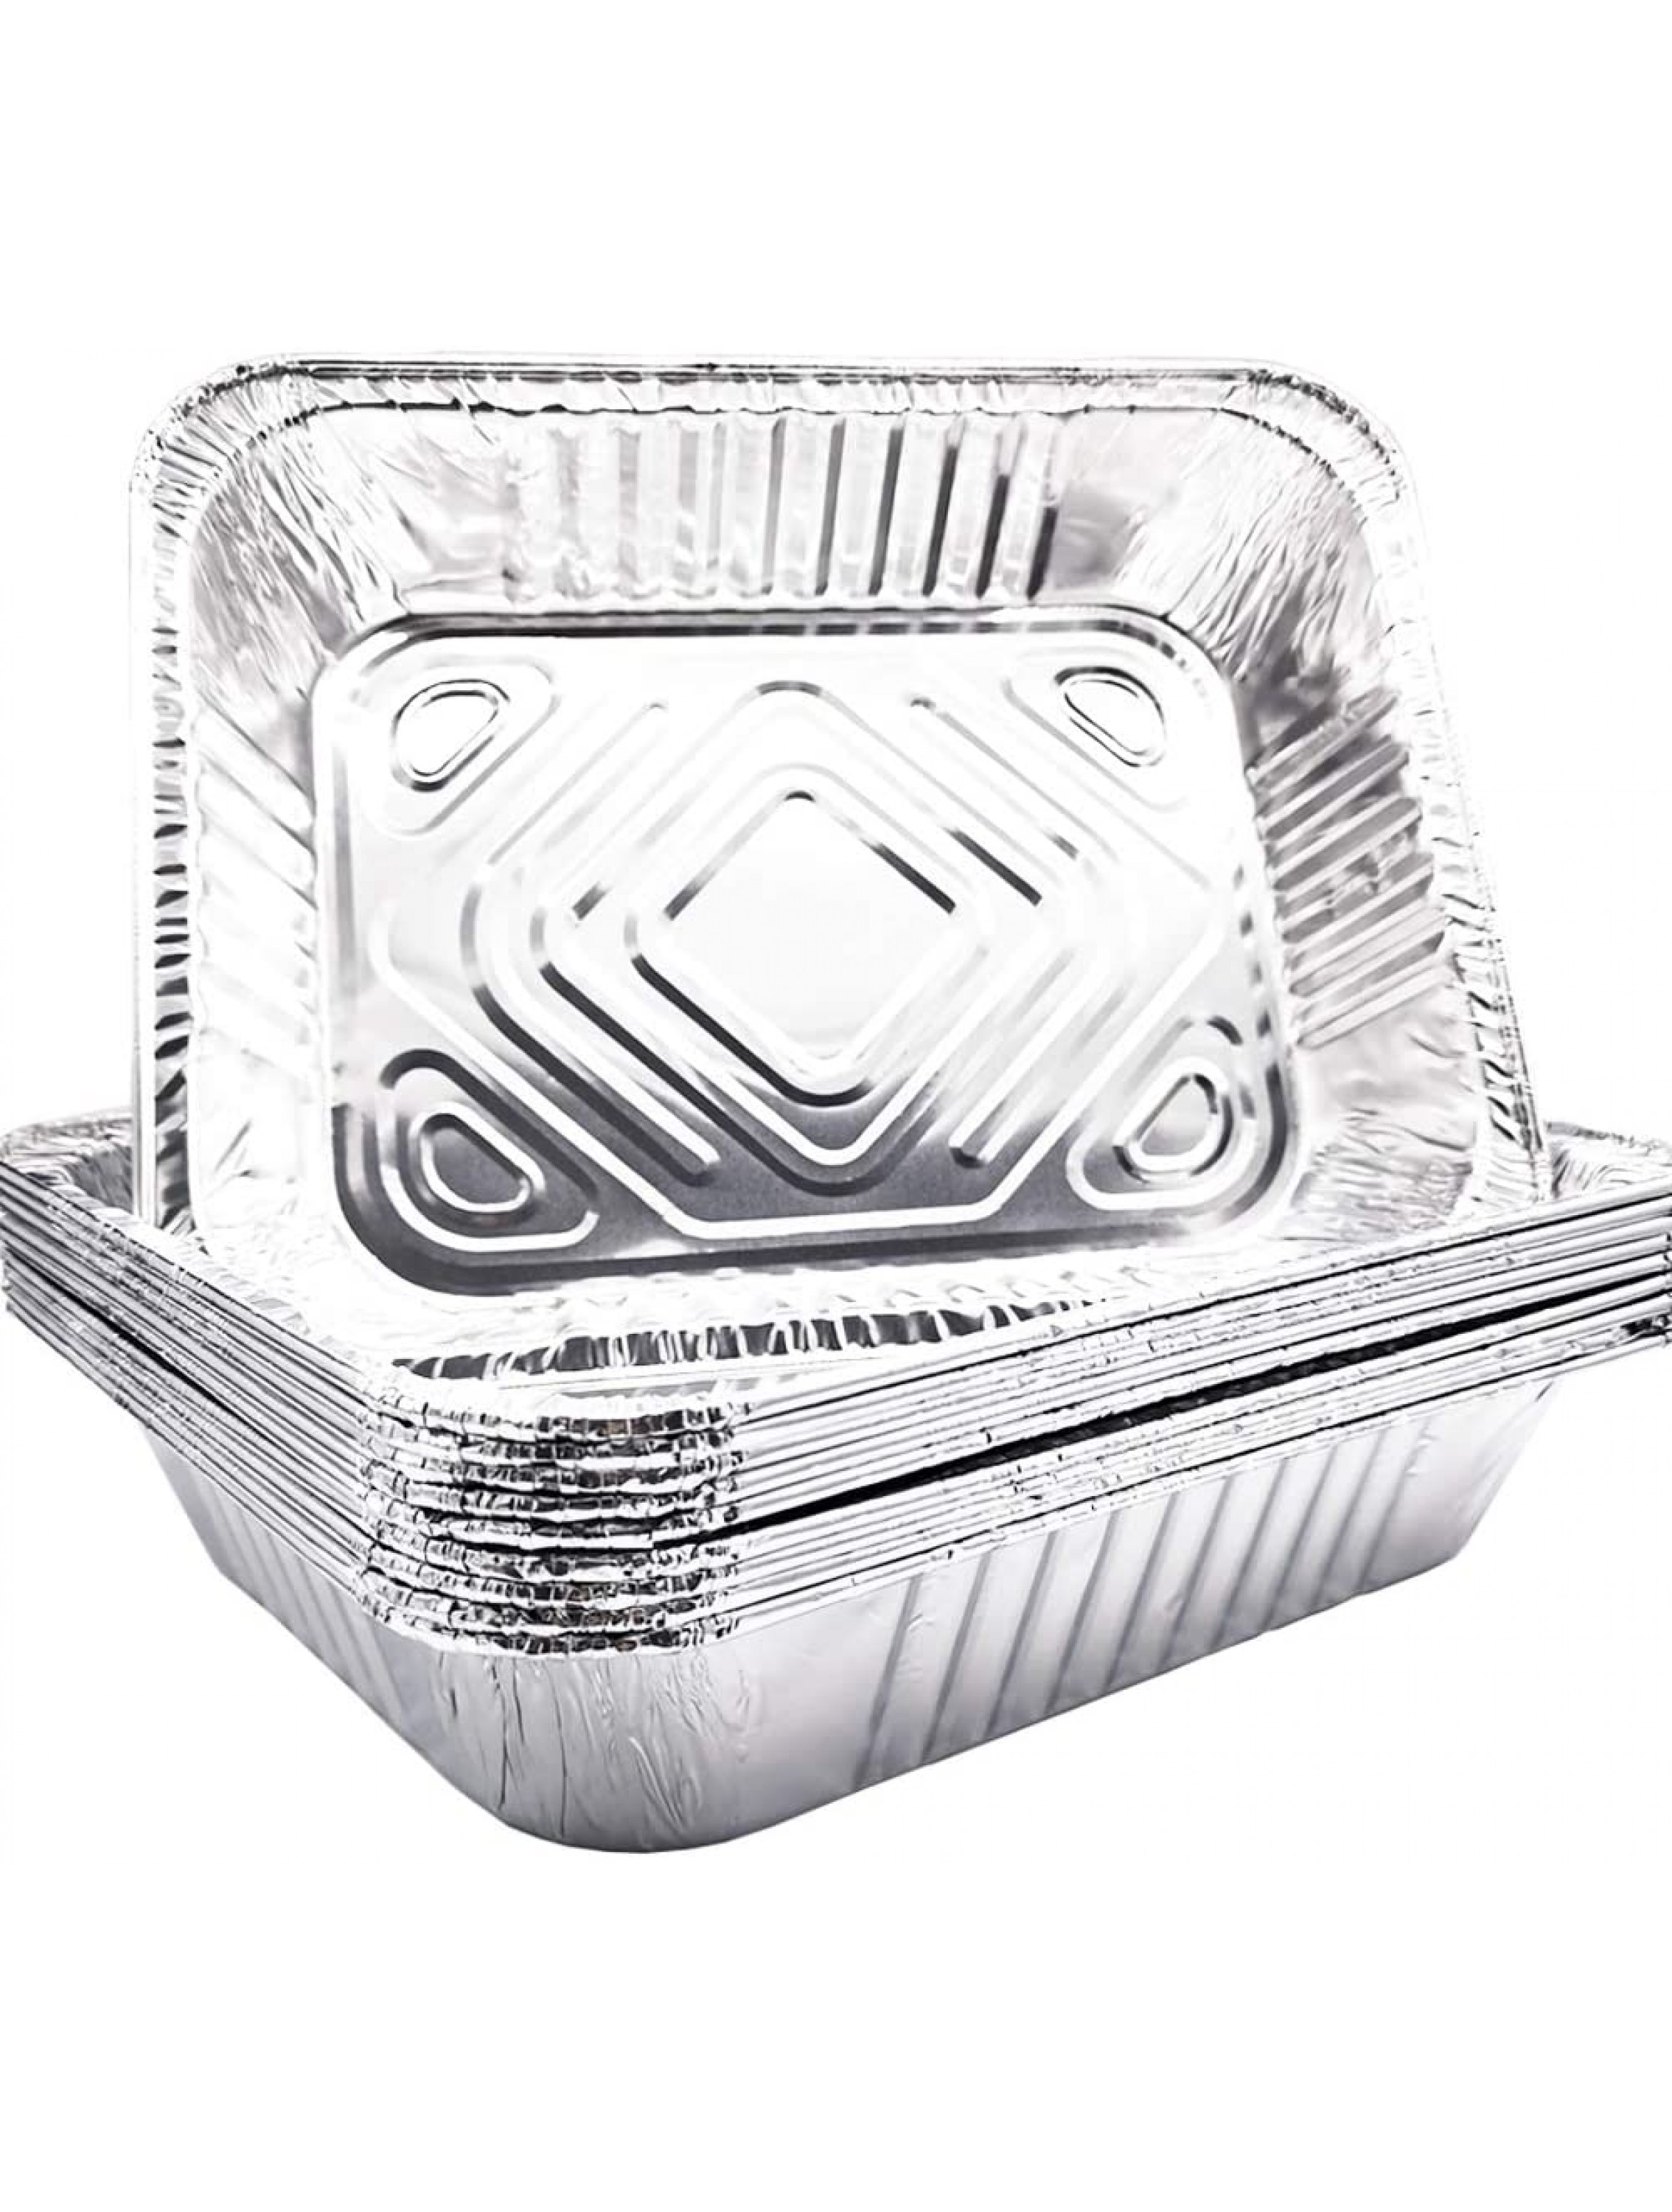 10 Pack 9x 13 Aluminum Pans Disposable Aluminum Foil Meal Prep Cookware Sturdy Half Size Deep Steam Table Pans for Baking,Cooking,Roasting & Reheating - BK10JQP8O